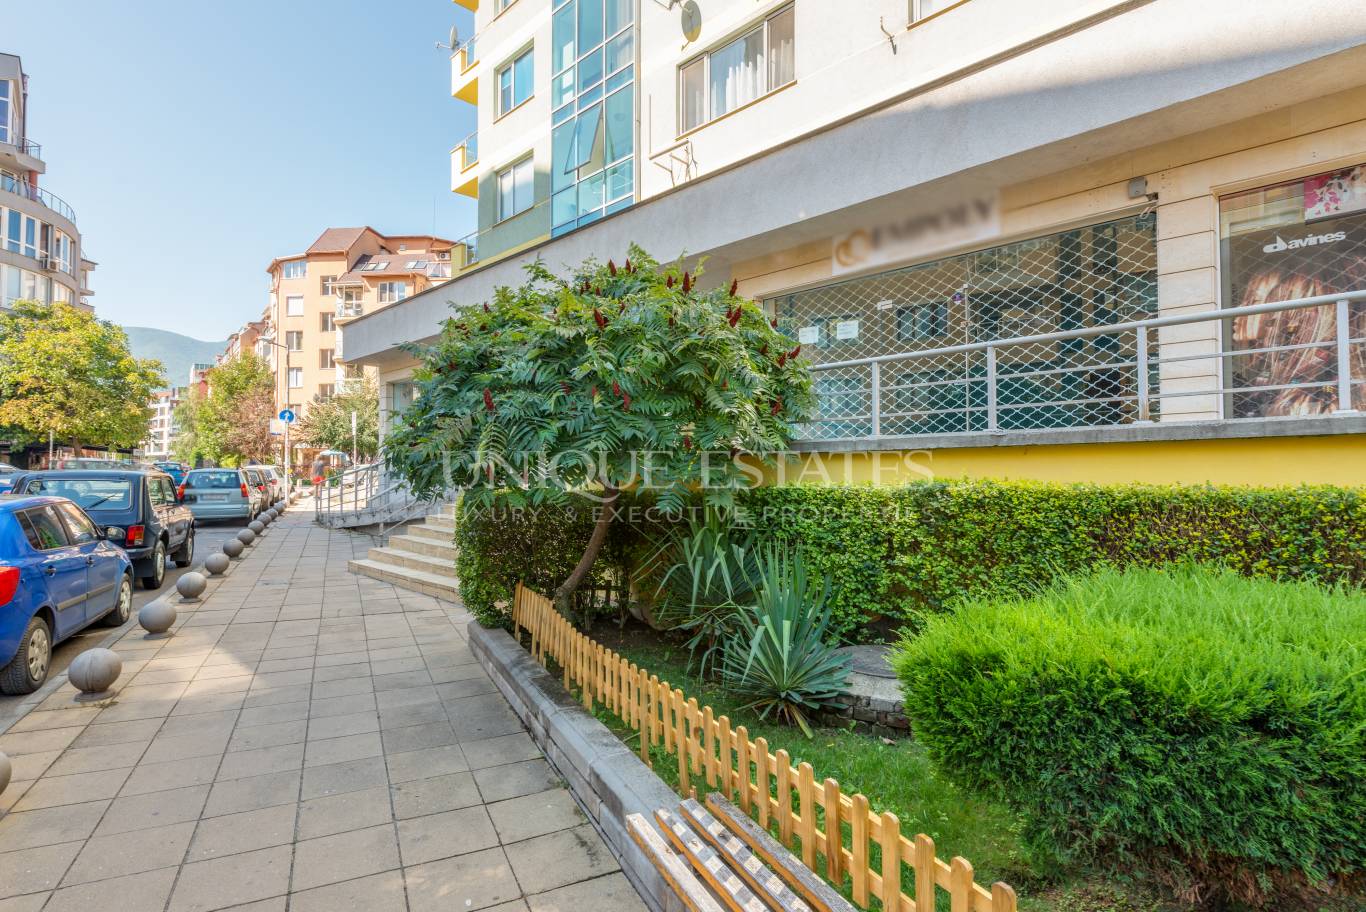 Commercial property for sale in Sofia, Manastirski livadi - West with listing ID: K13968 - image 6